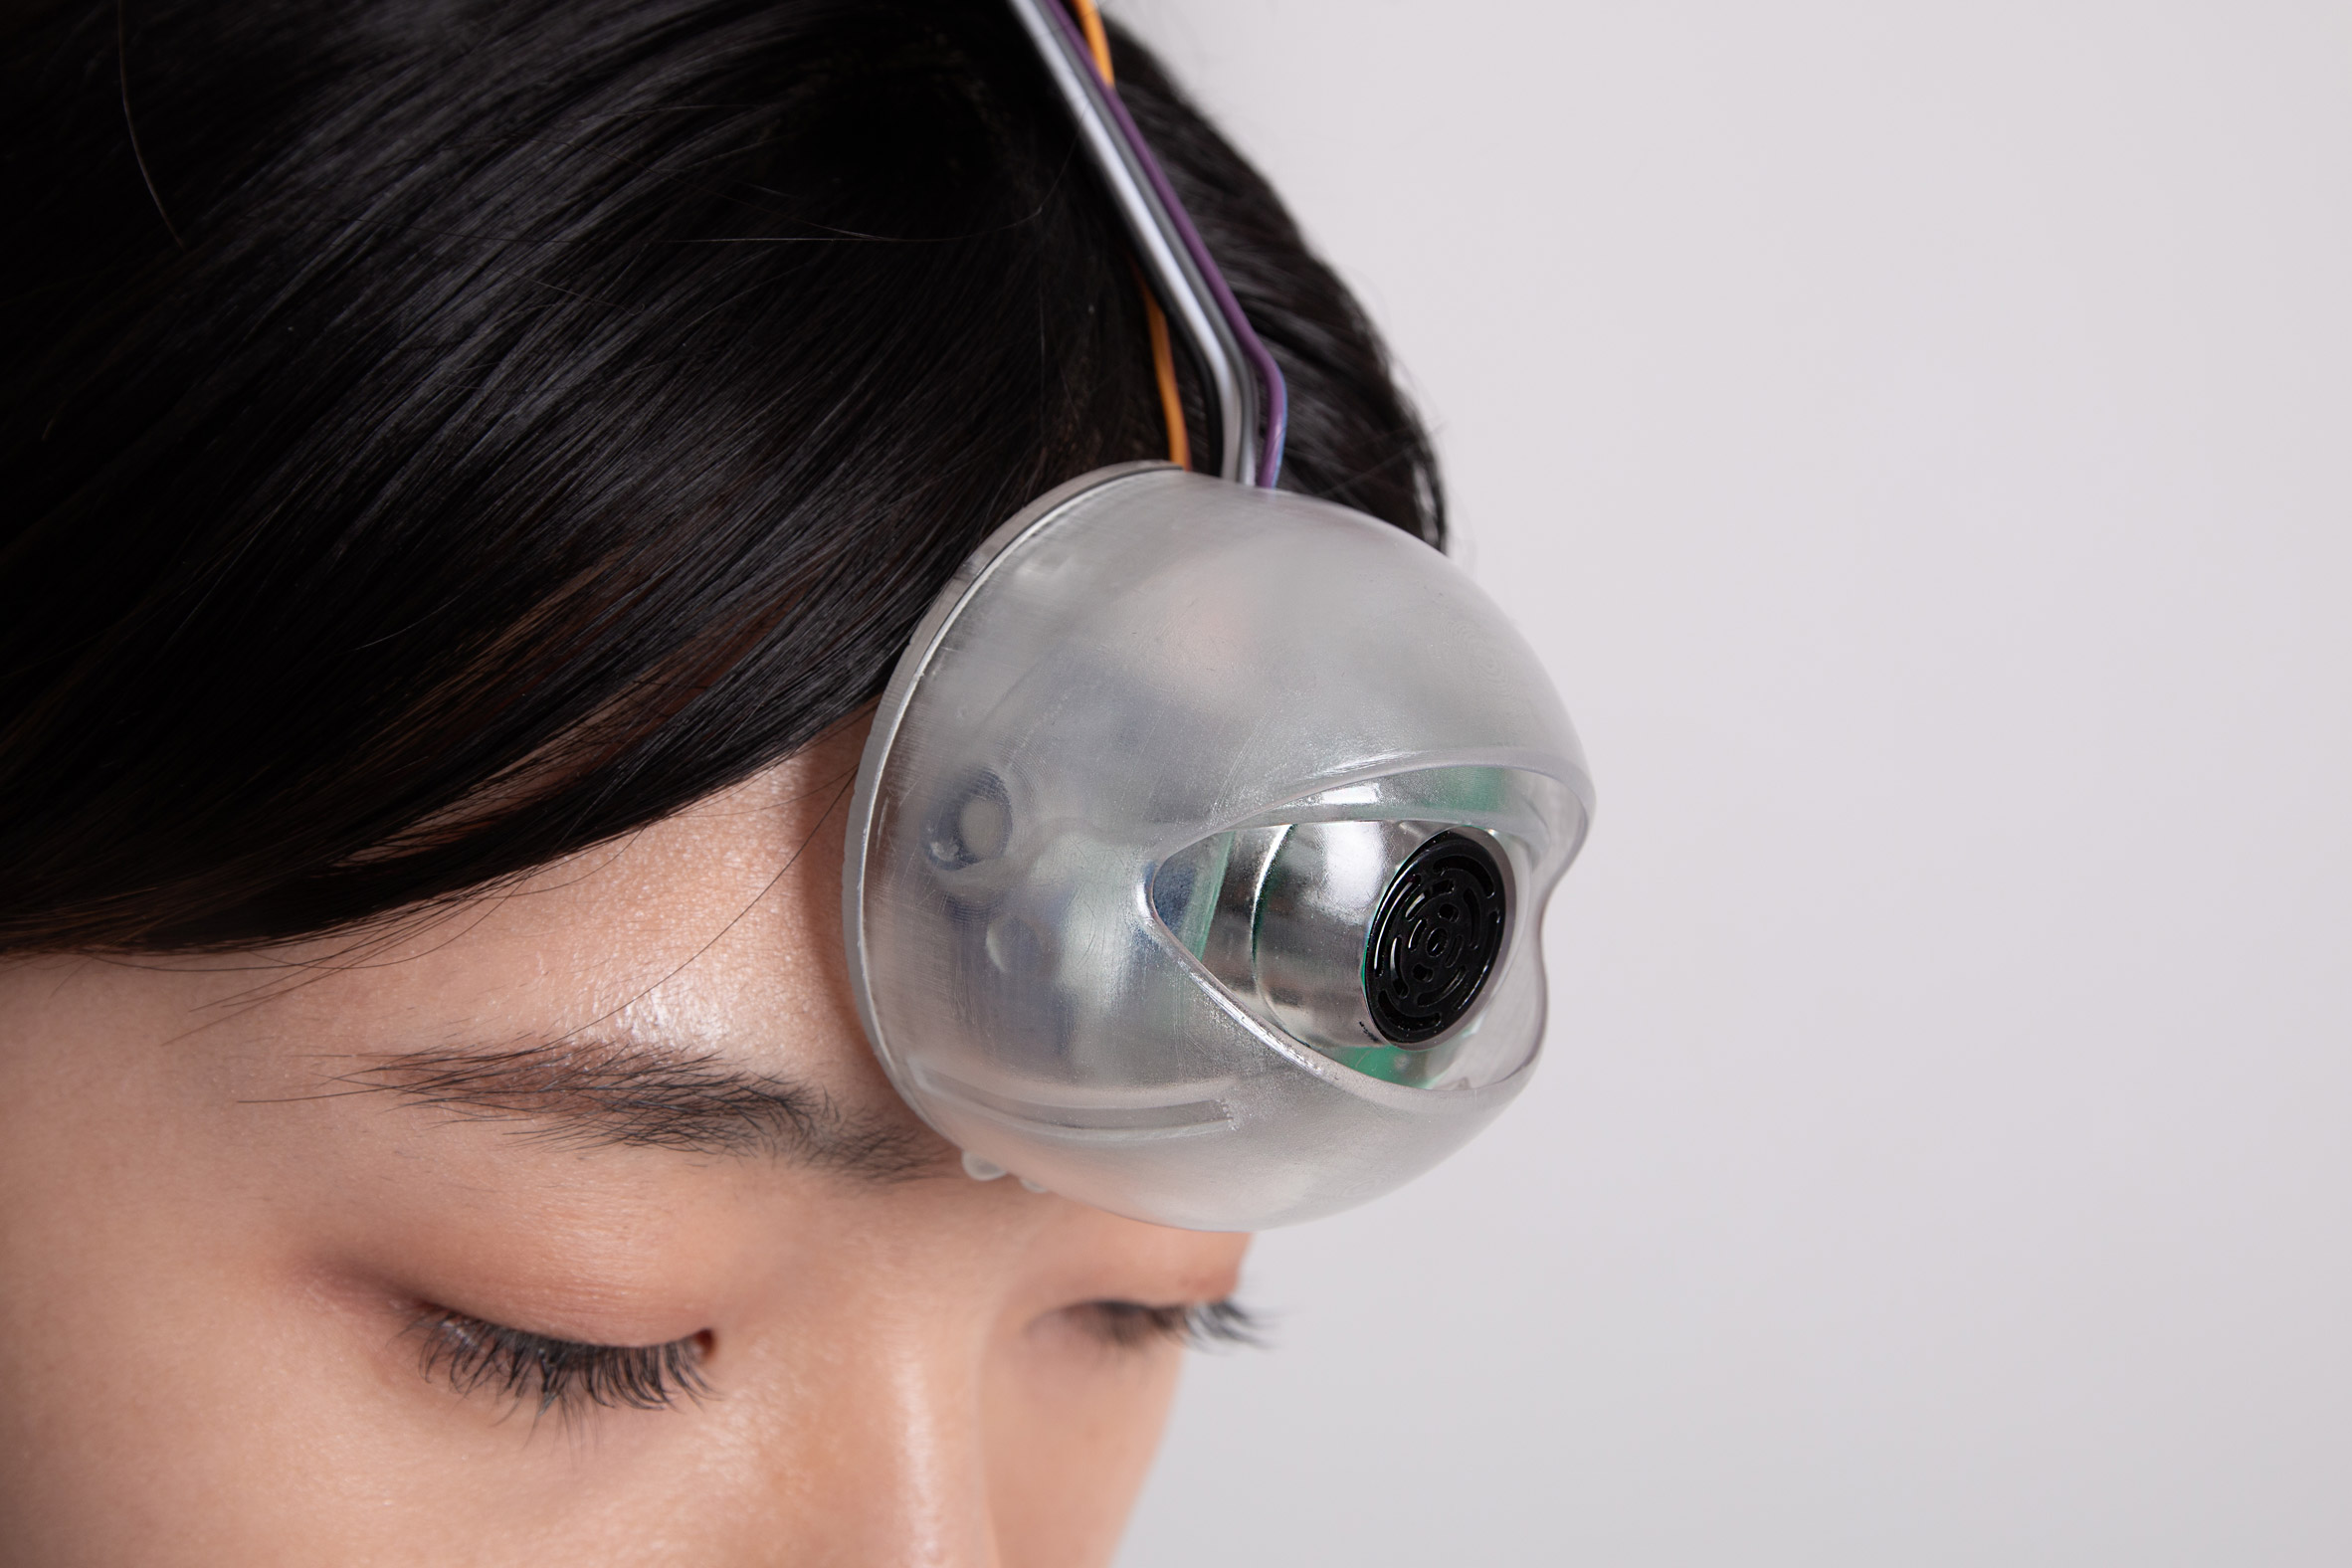 Close-up of robotic eye by Minwook Paeng on a woman's forehead